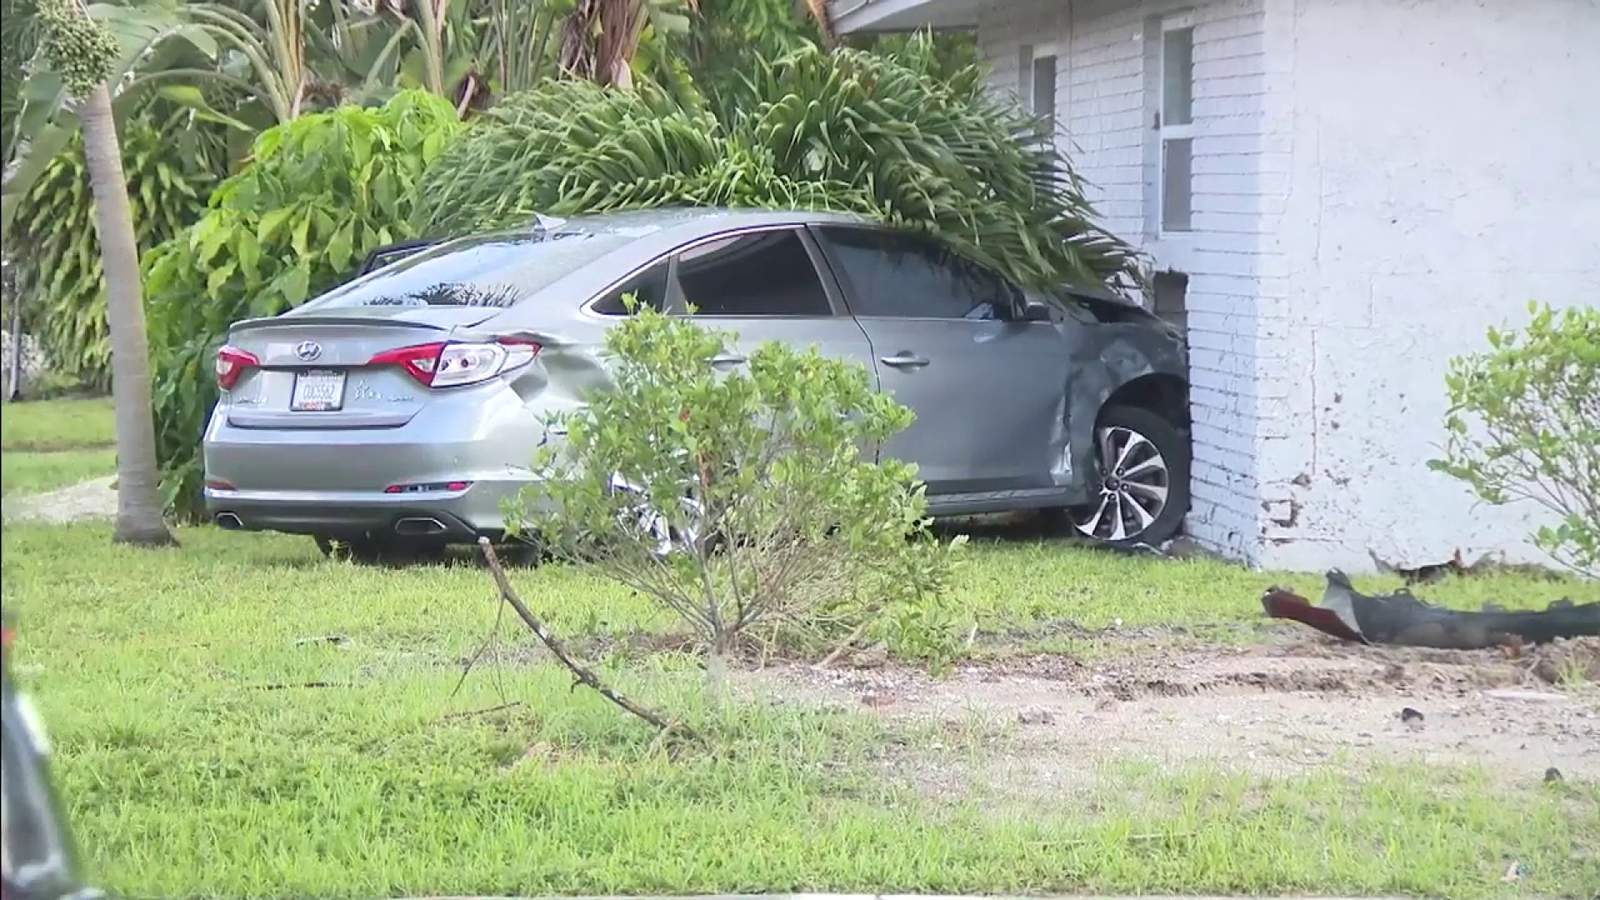 Car crashes into house in Fort Lauderdale